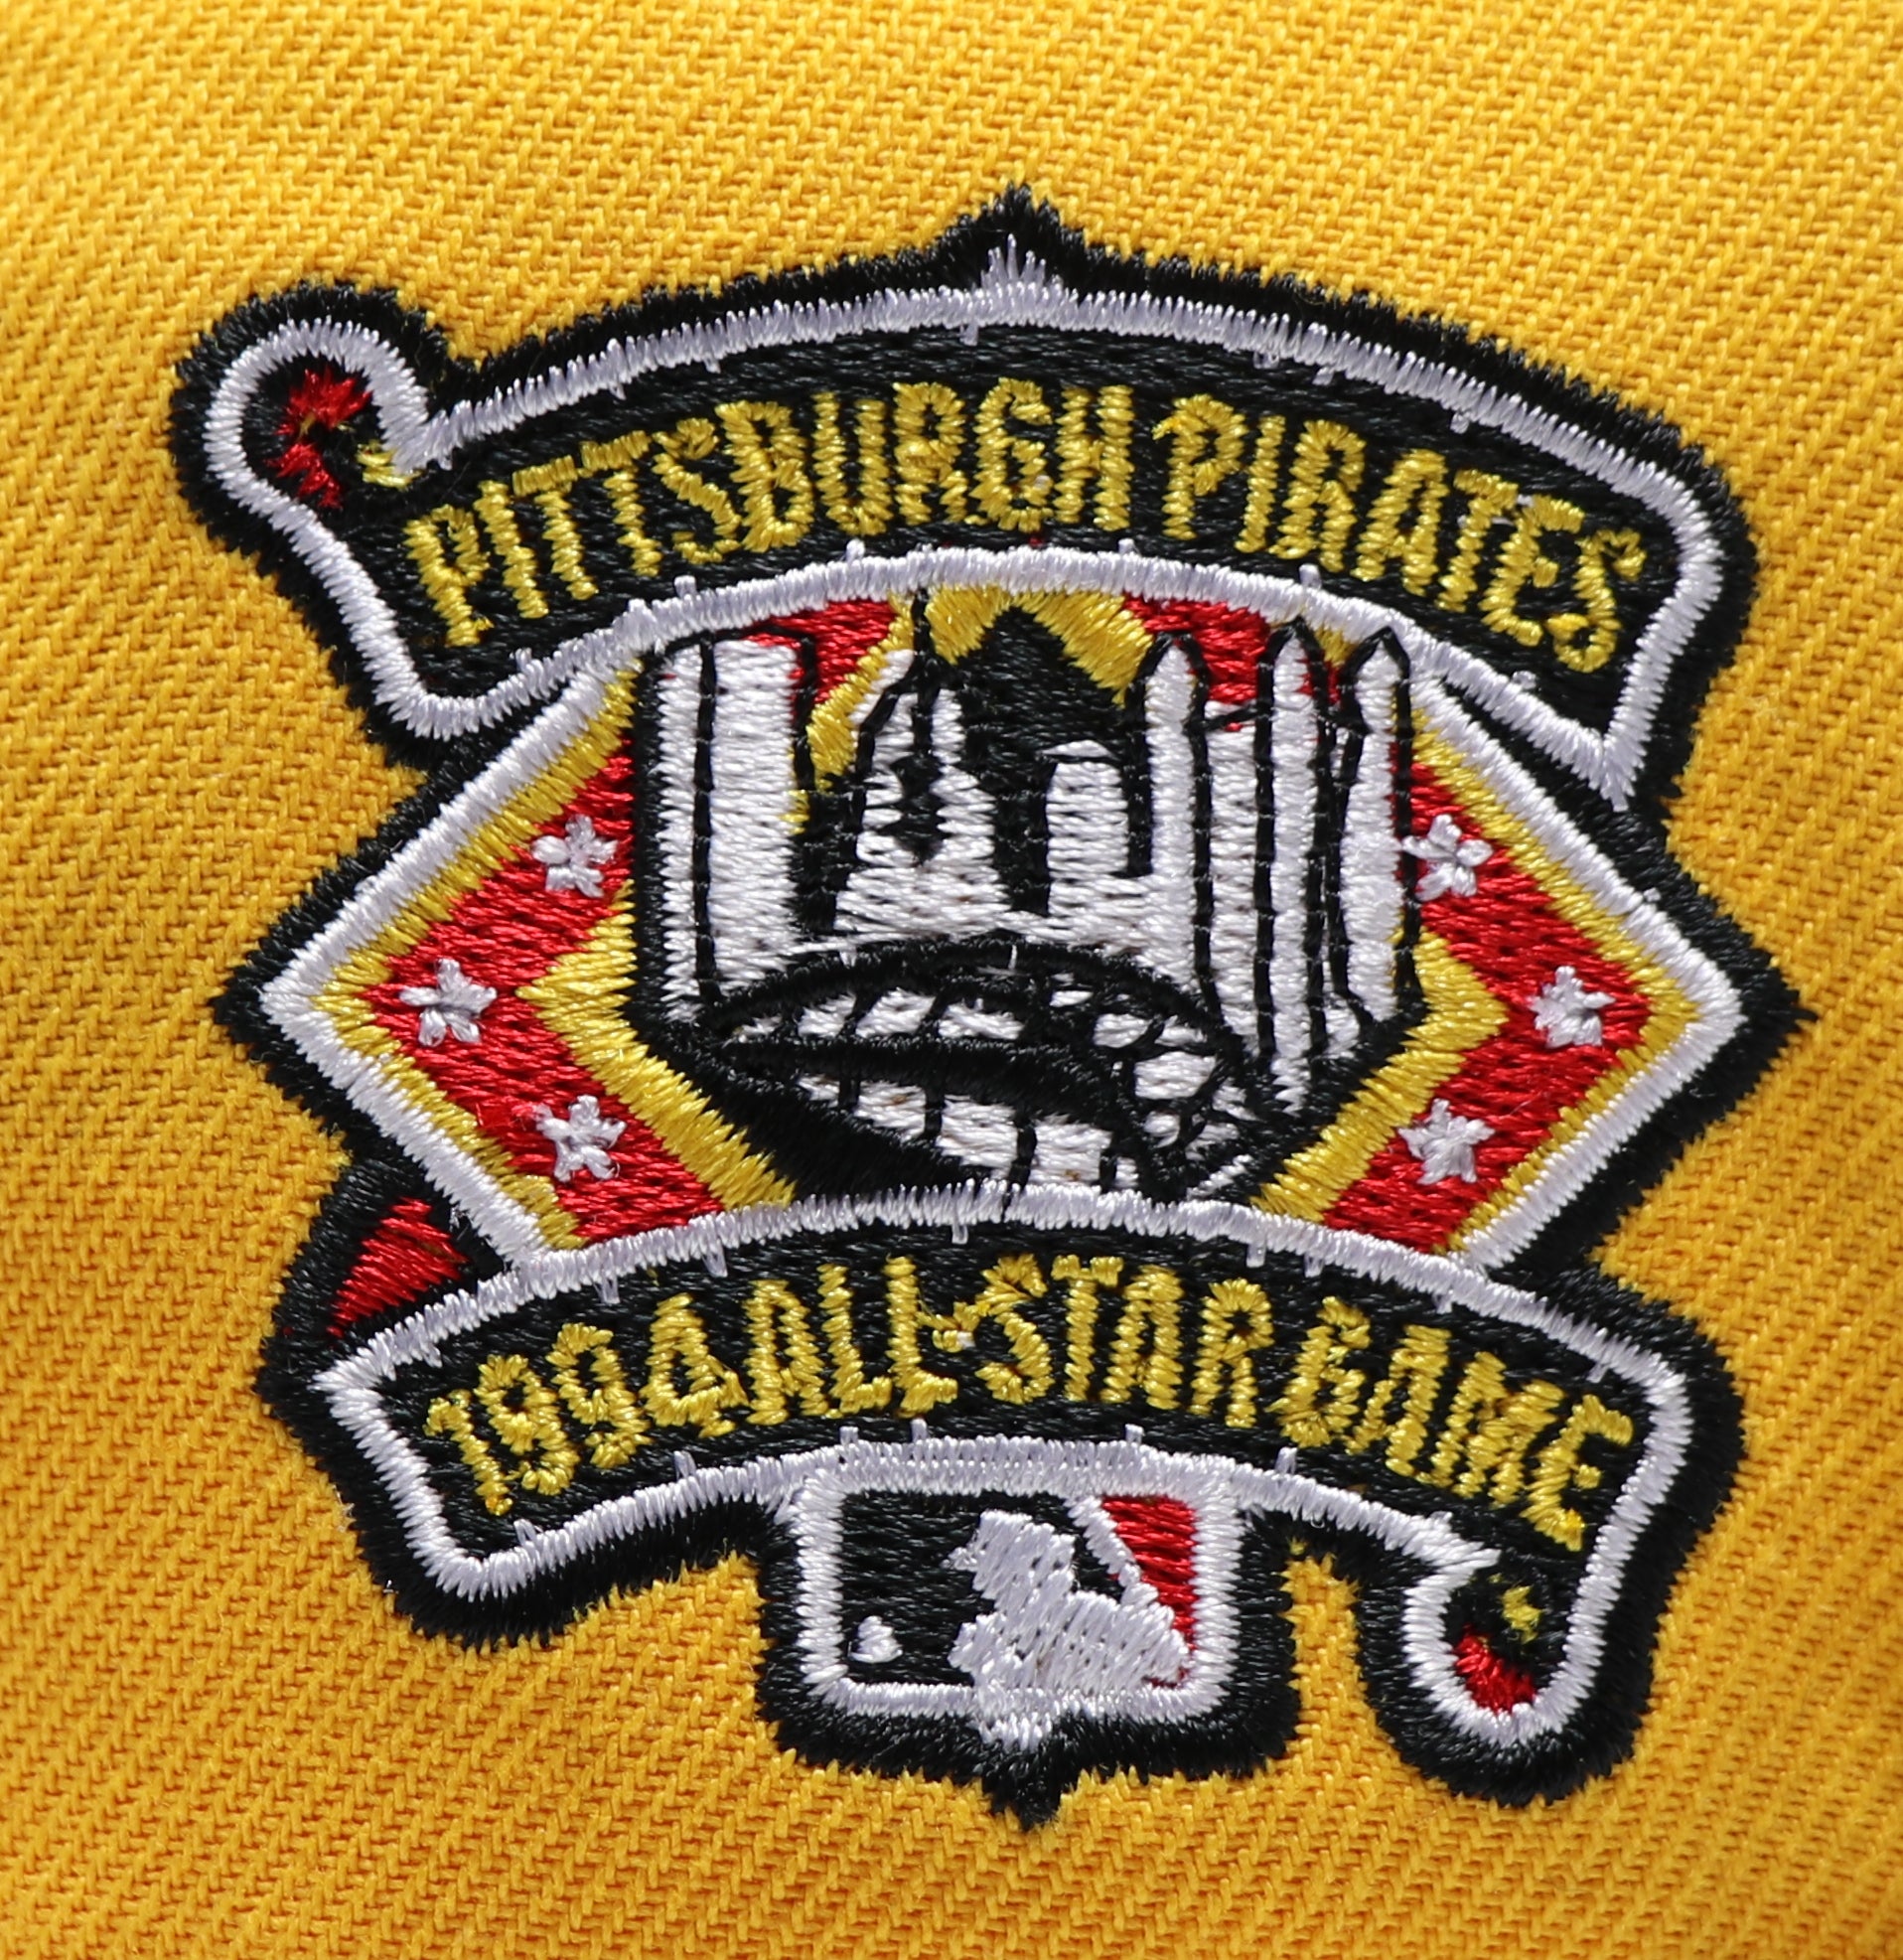 PITTSBURGH PIRATES (2-TONE) (1994 ALLSTARGAME) NEW ERA 59FIFTY FITTED (GREEN UNDER VISOR)